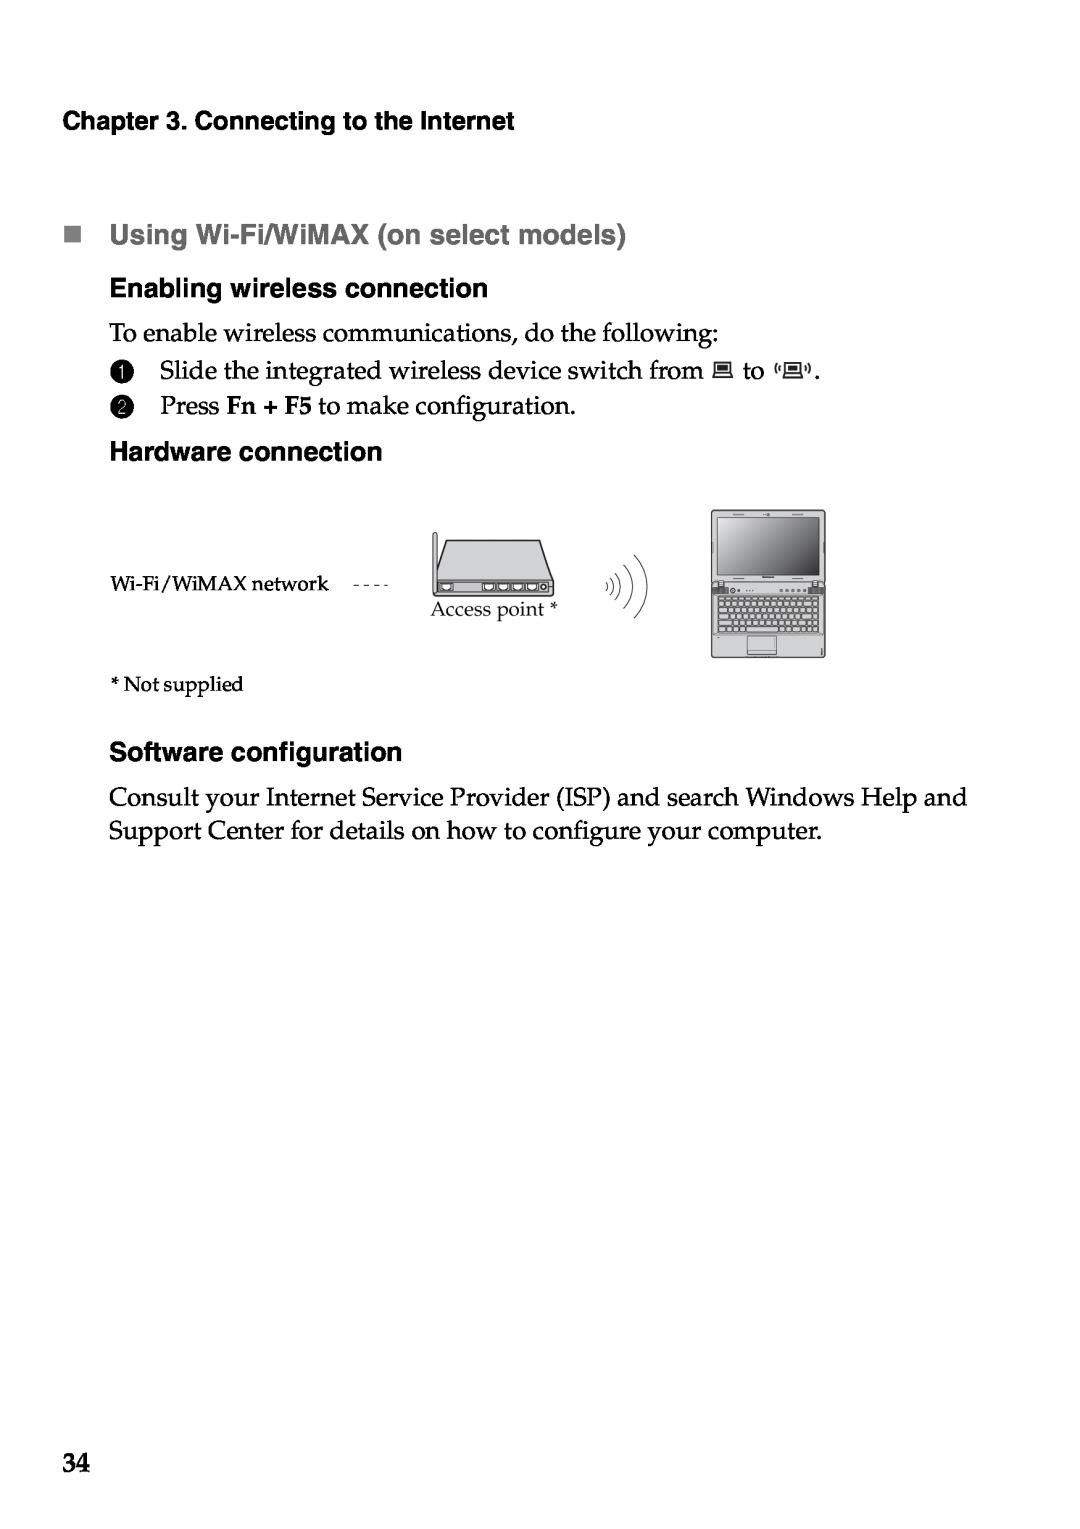 Lenovo Z570 „ Using Wi-Fi/WiMAX on select models Enabling wireless connection, Hardware connection, Software configuration 